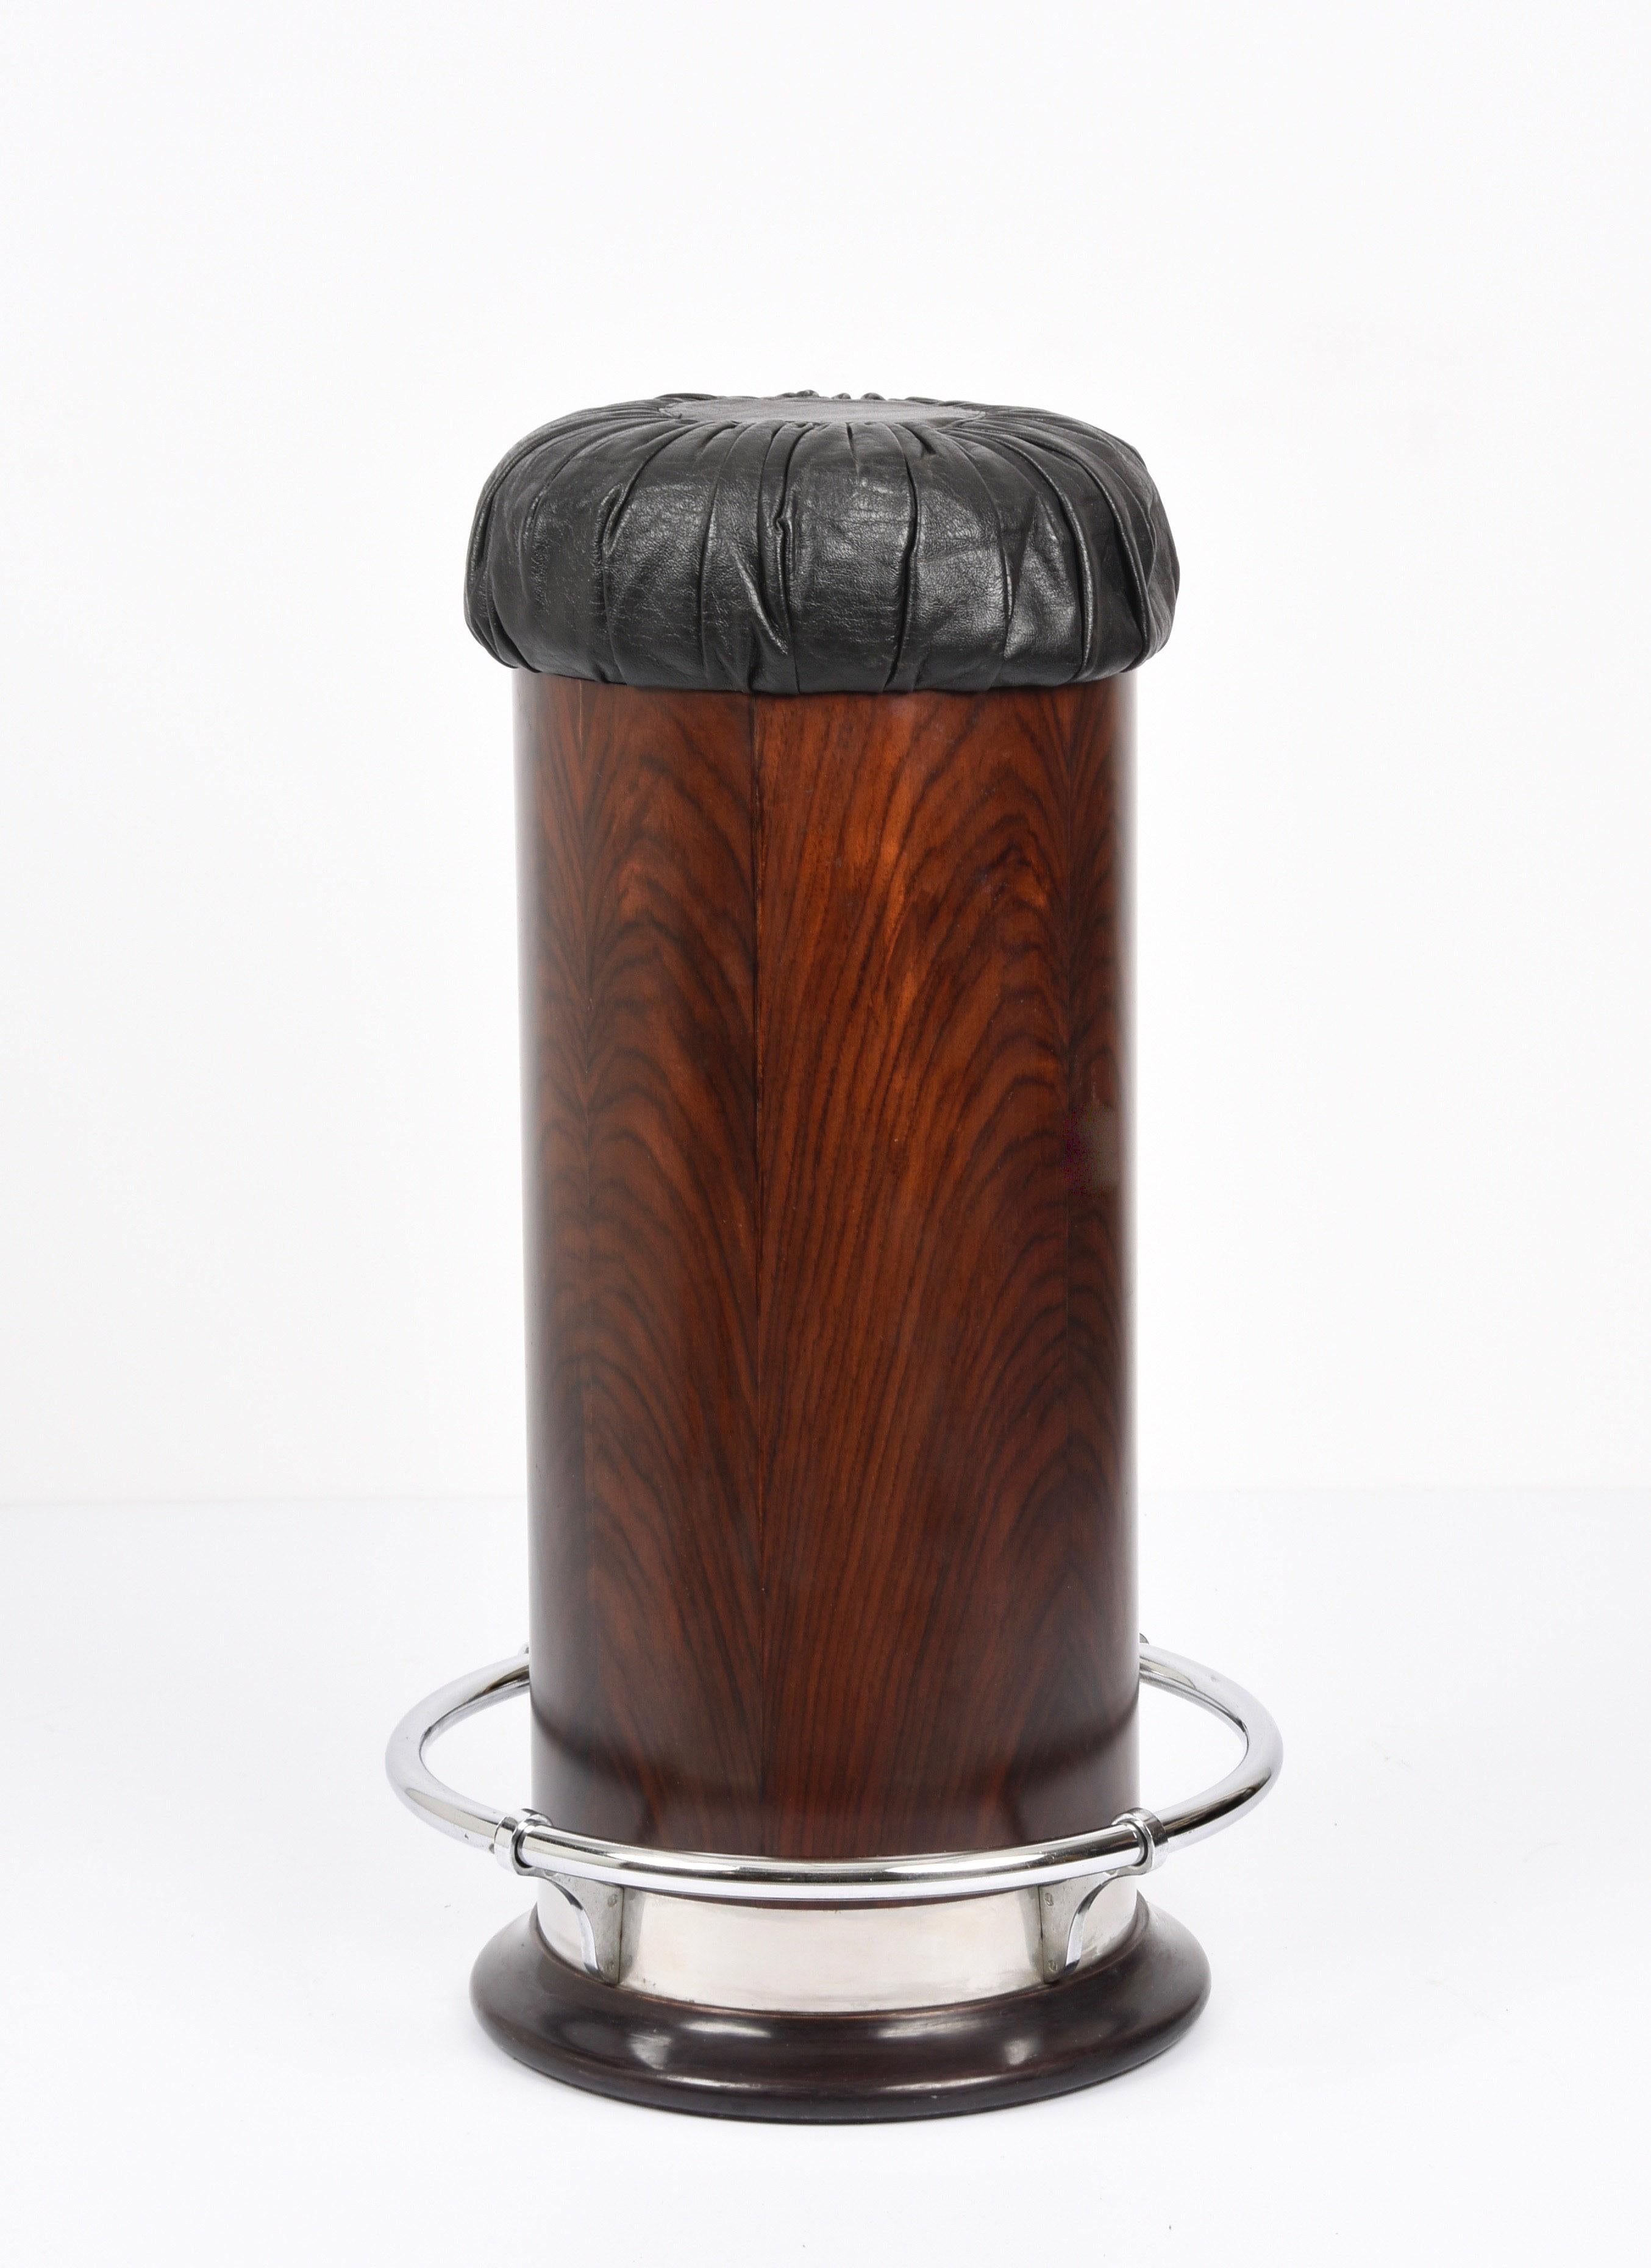 Art Deco Mid-Century Modern French Wood, Chromed Metal and Black Leather Bar Stool, 1930s For Sale